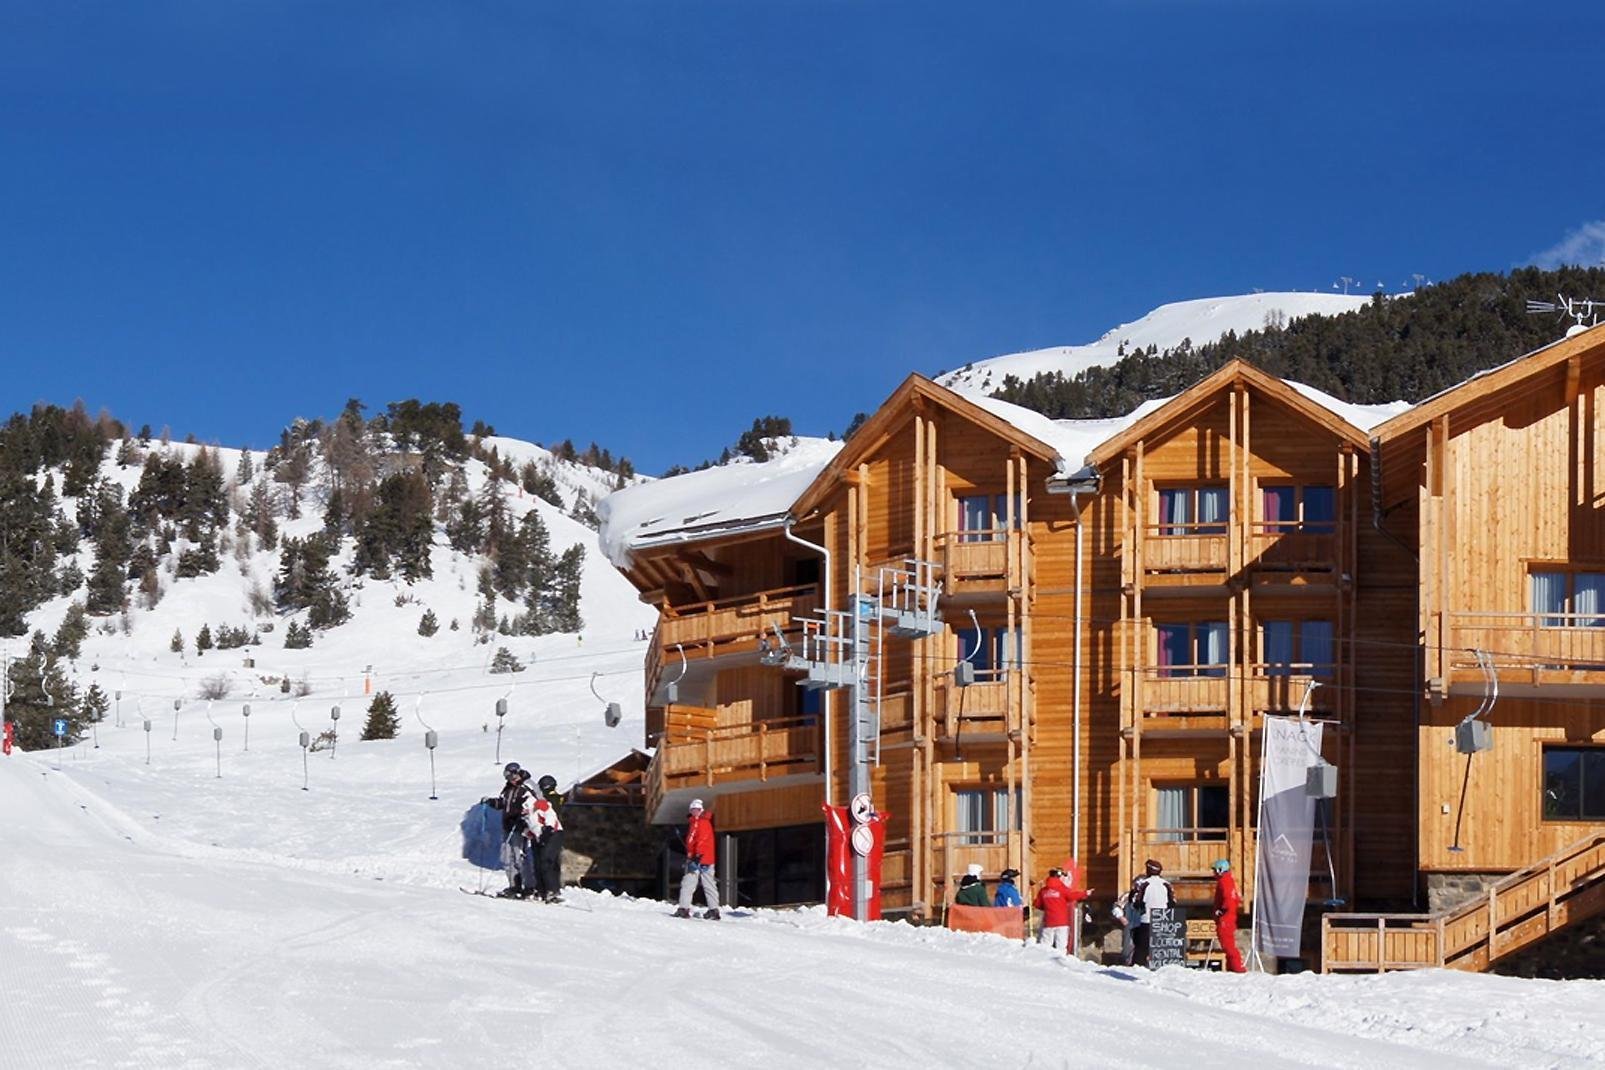 A small resort in the Hautes-Alpes department located at 1,860m of altitude, Montgenèvre is a great place for families who wish to enjoy a friendly-sized resort and for hard-core skiers who can hurtle down the 250 miles of slopes of 'La Voie Lactée' (milky way), to which the resort is linked. Moreover, this is the only French resort with access to the area used during the 2006 Turin Olympics. It isn't ...